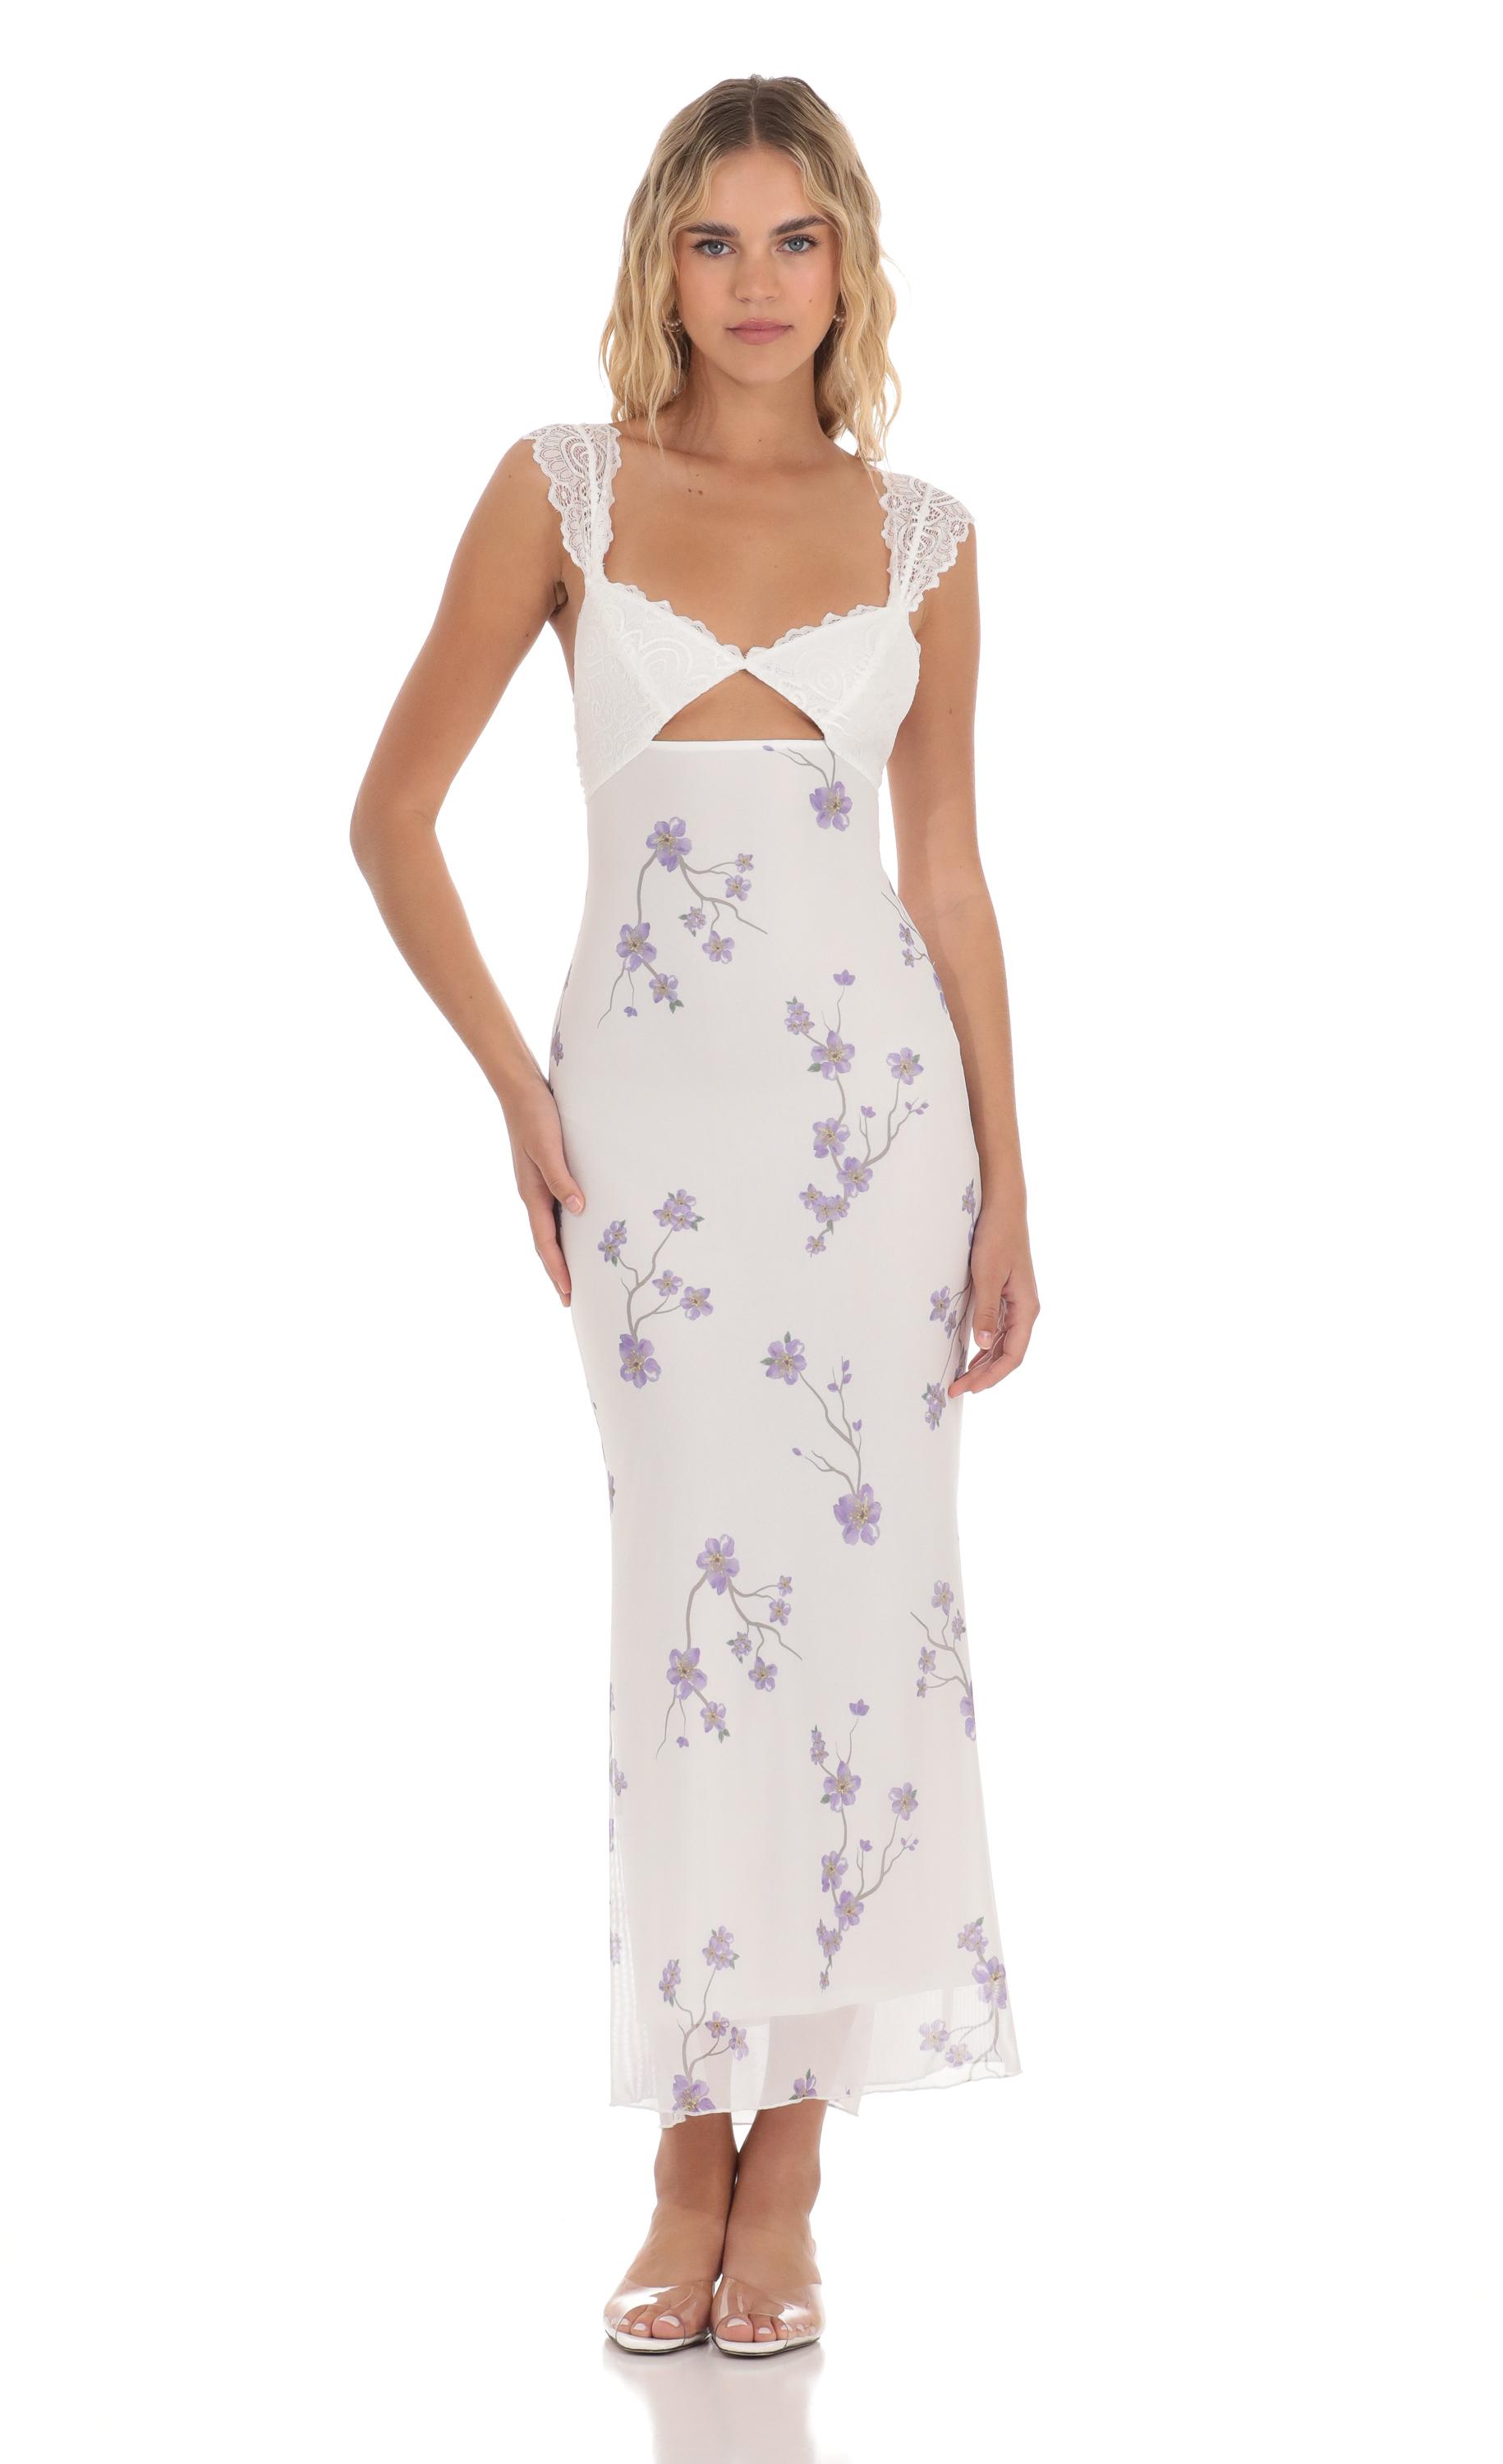 Lace Cutout Floral Maxi Dress in White